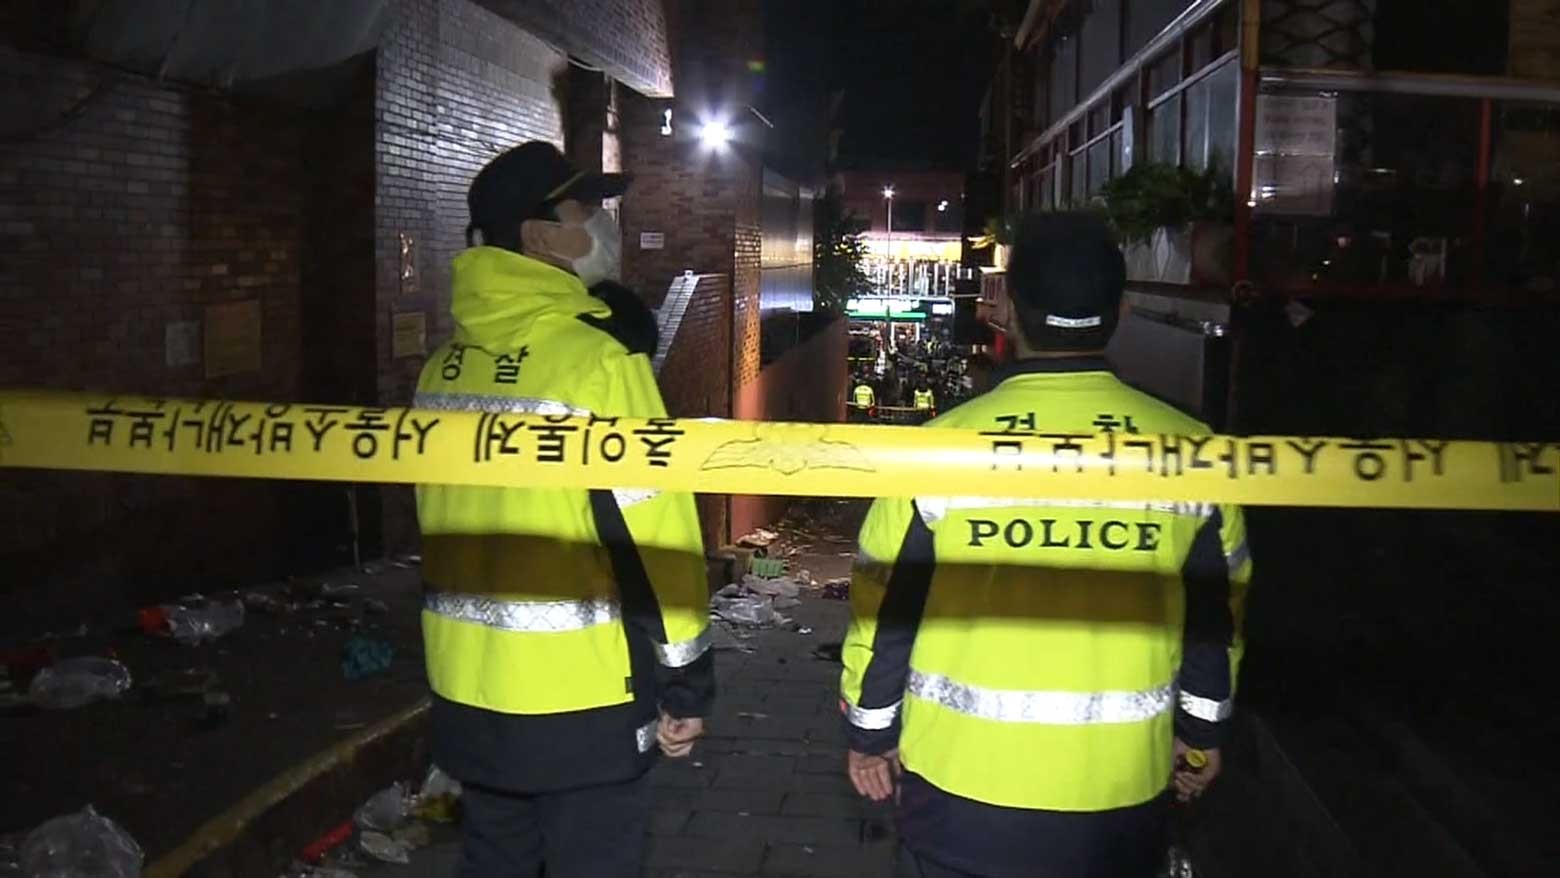 After Itaewon, experts offer advice on staying safe in crowds